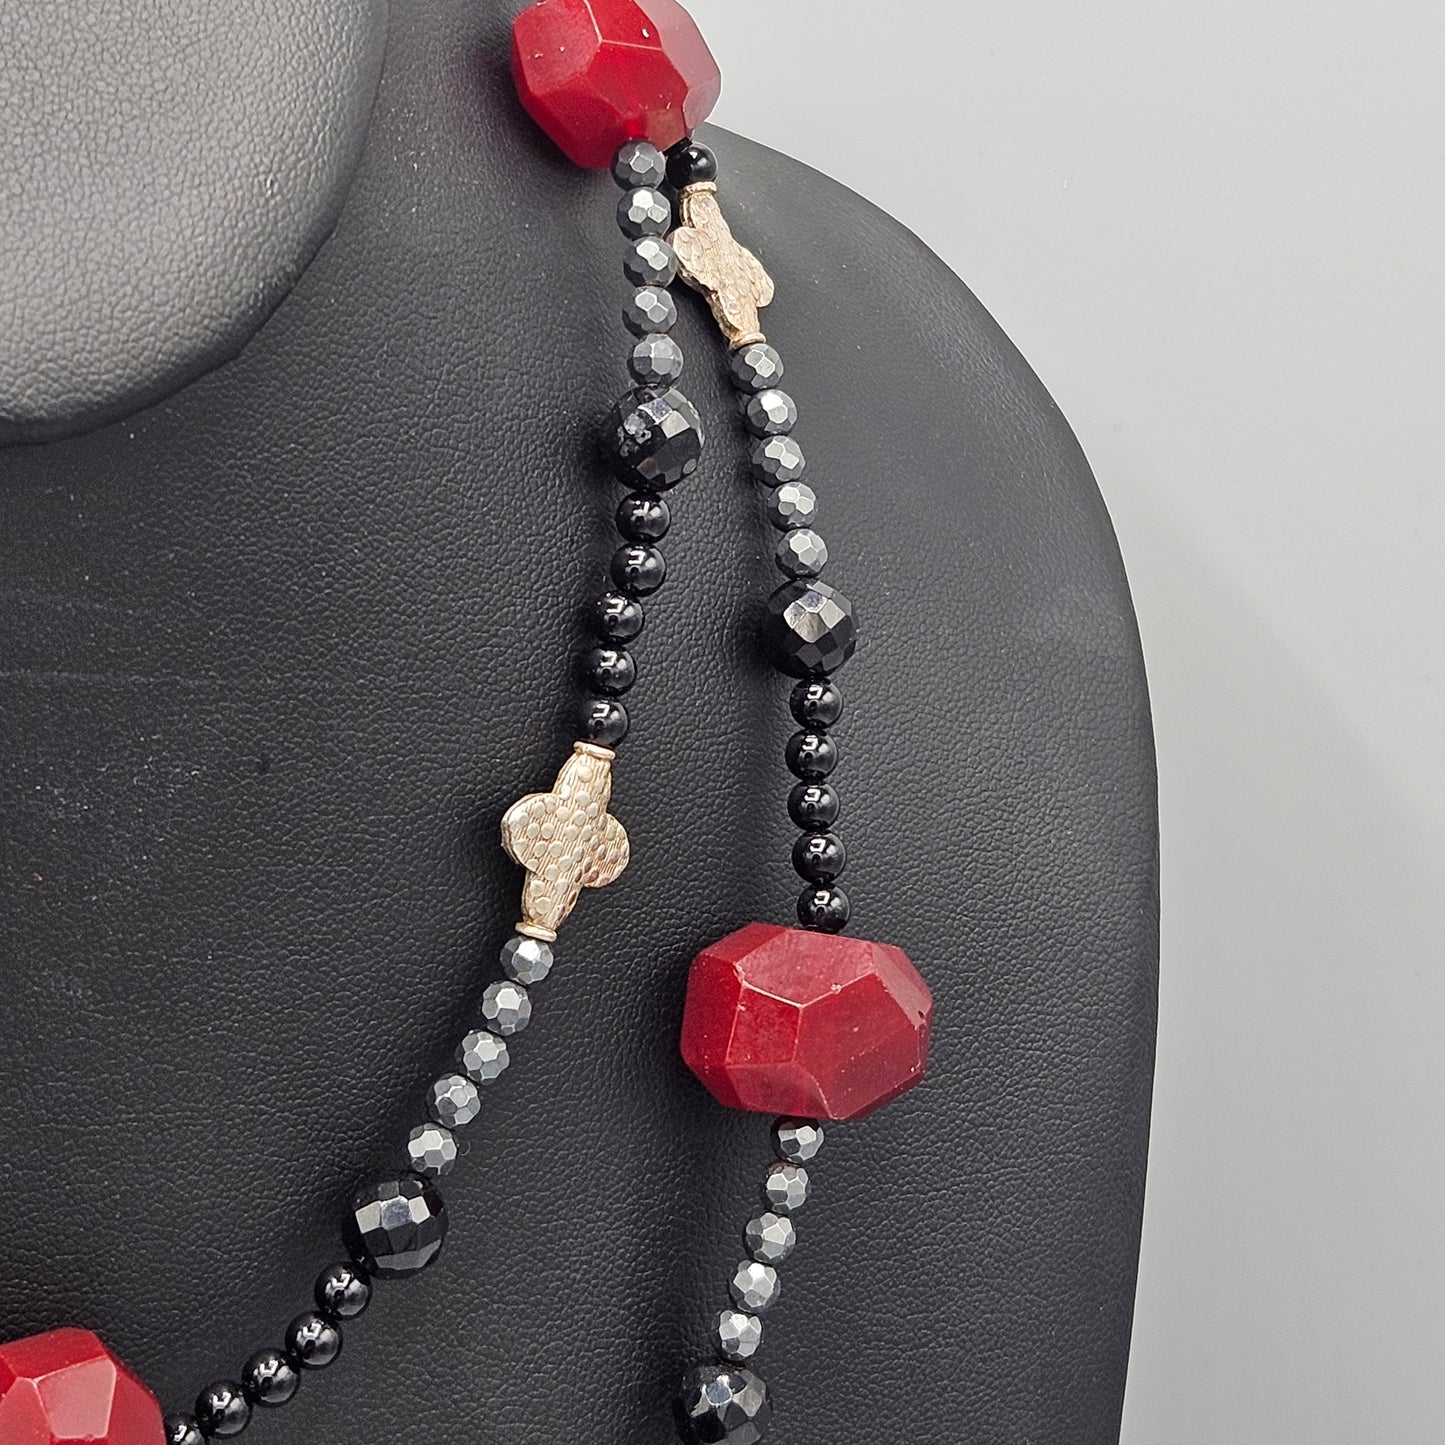 Black, Red & Gray Strand Necklace - 36"